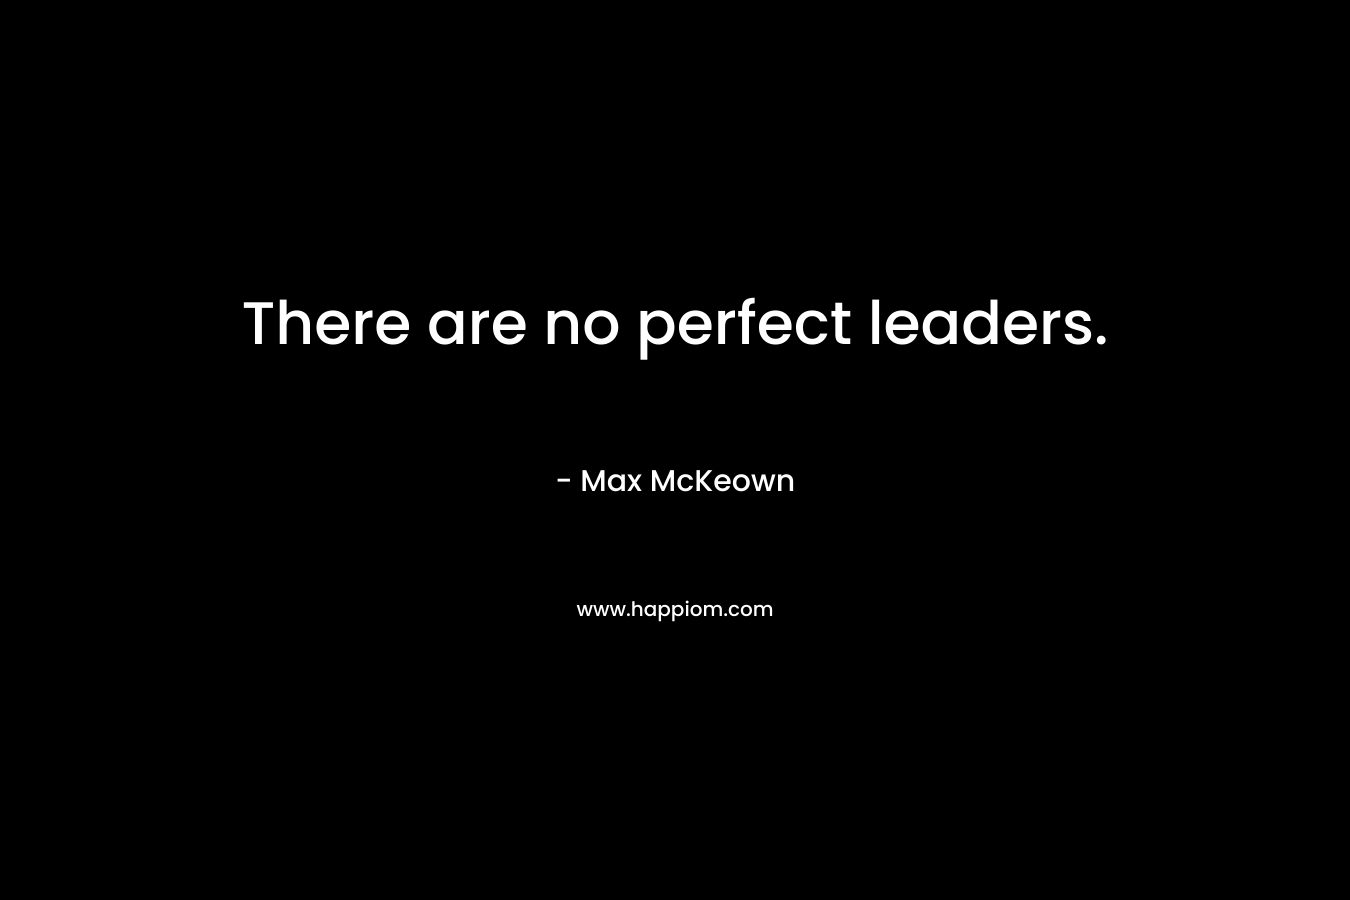 There are no perfect leaders.